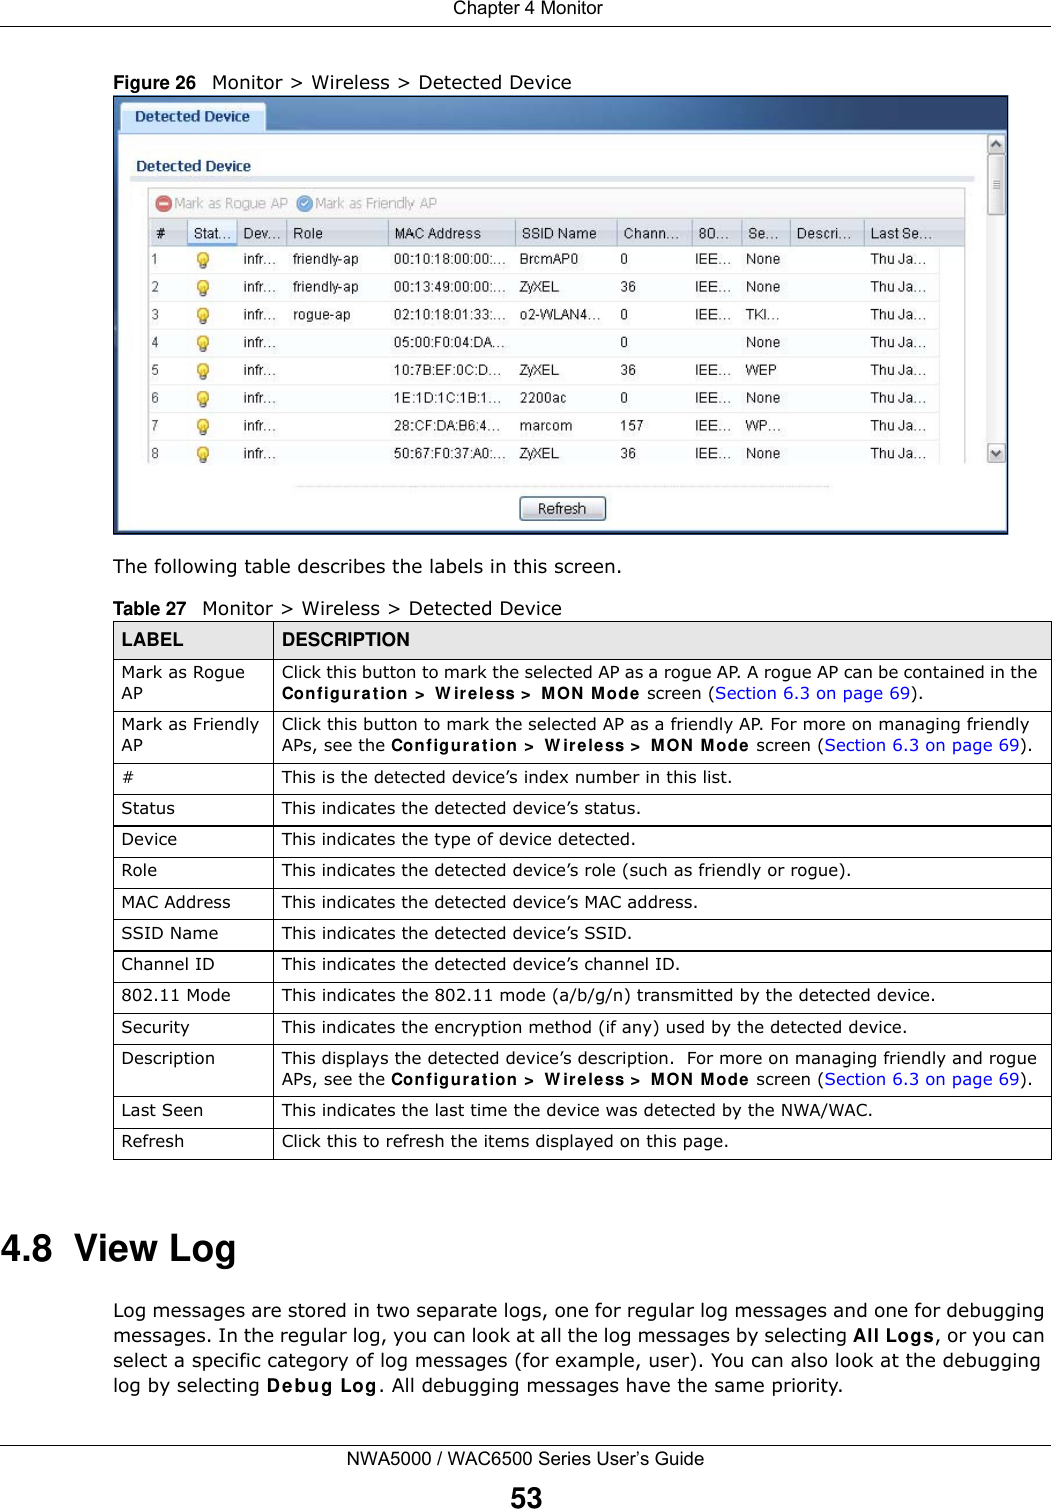  Chapter 4 MonitorNWA5000 / WAC6500 Series User’s Guide53Figure 26   Monitor &gt; Wireless &gt; Detected Device  The following table describes the labels in this screen. 4.8  View LogLog messages are stored in two separate logs, one for regular log messages and one for debugging messages. In the regular log, you can look at all the log messages by selecting All Logs, or you can select a specific category of log messages (for example, user). You can also look at the debugging log by selecting De bug Log. All debugging messages have the same priority. Table 27   Monitor &gt; Wireless &gt; Detected DeviceLABEL DESCRIPTIONMark as Rogue APClick this button to mark the selected AP as a rogue AP. A rogue AP can be contained in the Configurat ion &gt;  W ireless &gt;  M ON  M ode screen (Section 6.3 on page 69).Mark as Friendly APClick this button to mark the selected AP as a friendly AP. For more on managing friendly APs, see the Configur a tion &gt;  W ir eless &gt;  MON  M ode  screen (Section 6.3 on page 69).# This is the detected device’s index number in this list.Status This indicates the detected device’s status.Device This indicates the type of device detected.Role This indicates the detected device’s role (such as friendly or rogue).MAC Address This indicates the detected device’s MAC address.SSID Name This indicates the detected device’s SSID.Channel ID This indicates the detected device’s channel ID.802.11 Mode This indicates the 802.11 mode (a/b/g/n) transmitted by the detected device.Security This indicates the encryption method (if any) used by the detected device.Description This displays the detected device’s description.  For more on managing friendly and rogue APs, see the Configur a tion &gt;  W ir eless &gt;  MON  M ode  screen (Section 6.3 on page 69).Last Seen This indicates the last time the device was detected by the NWA/WAC.Refresh Click this to refresh the items displayed on this page.